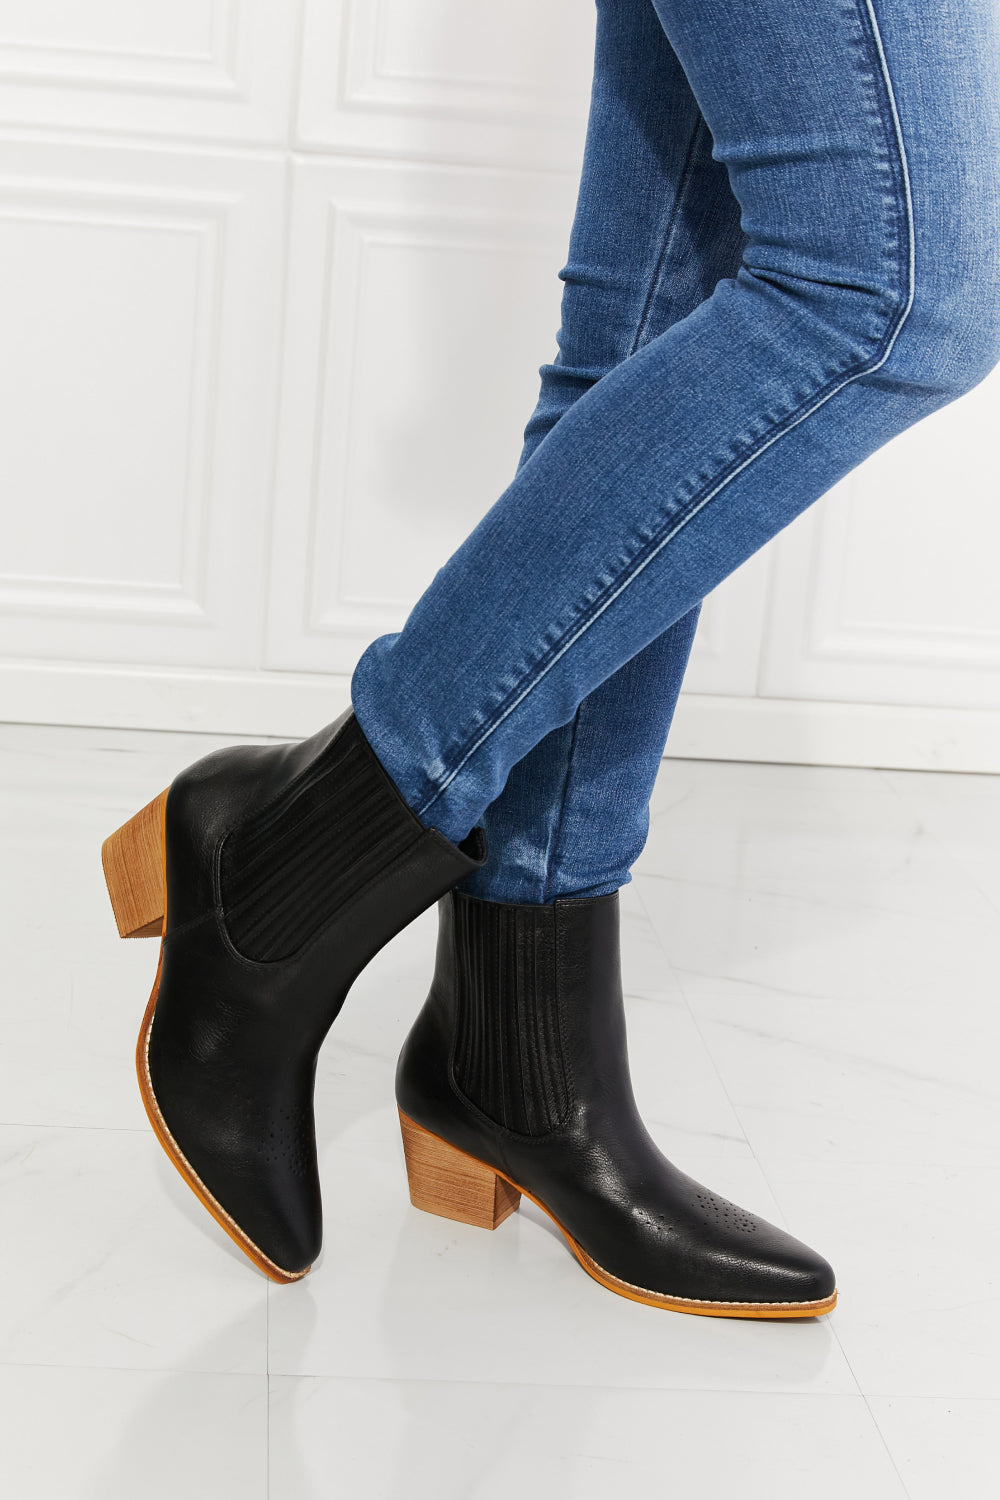 MMShoes Love the Journey Stacked Heel Chelsea Boot in Black - BEAUTY COSMOTICS SHOP